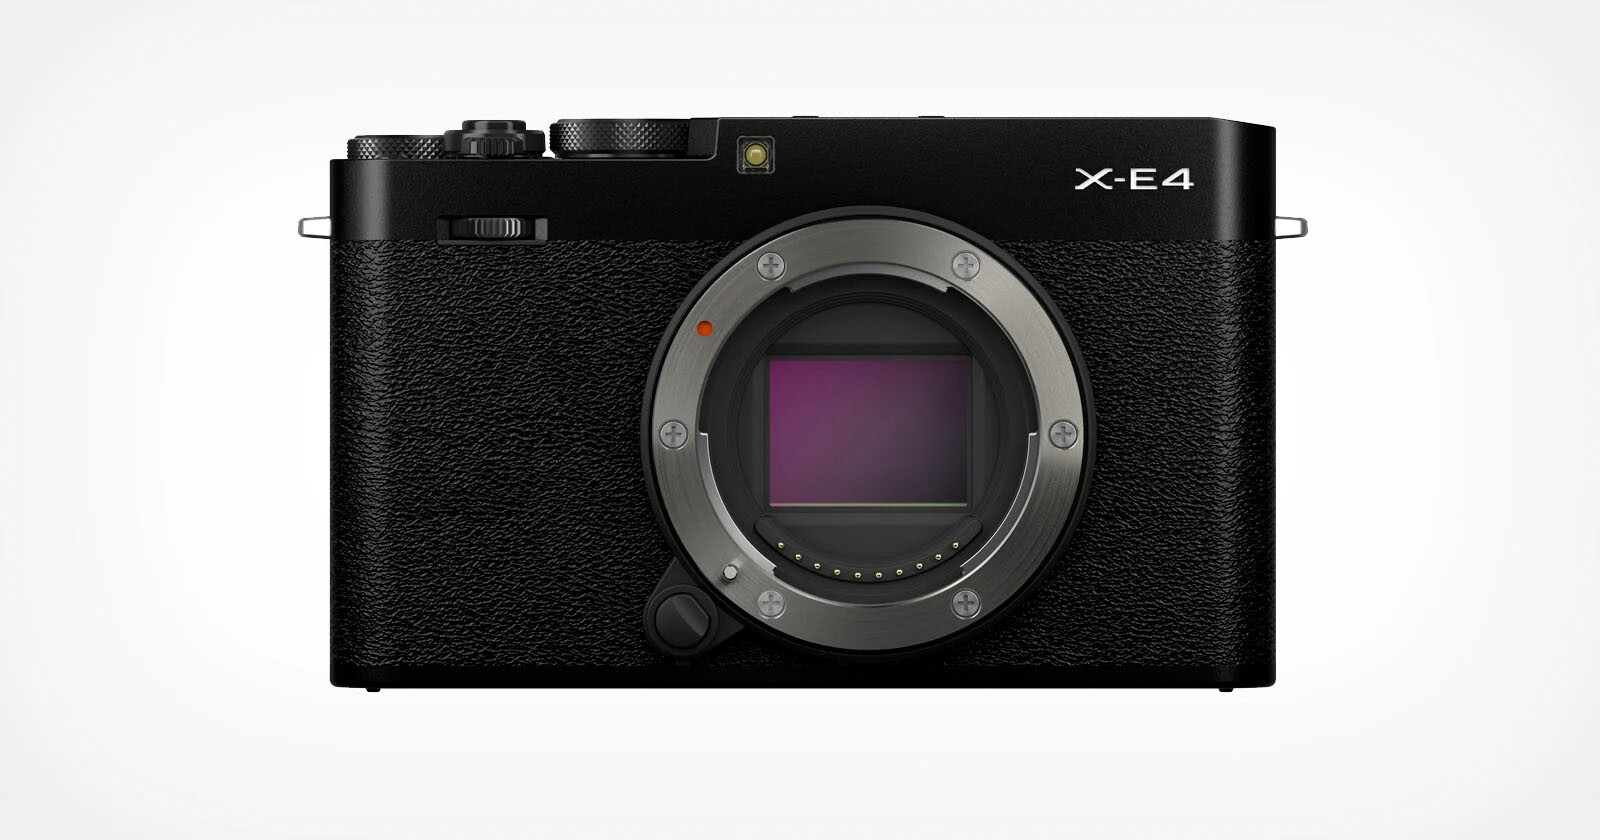  barely two-year-old fujifilm x-e4 appears have been 